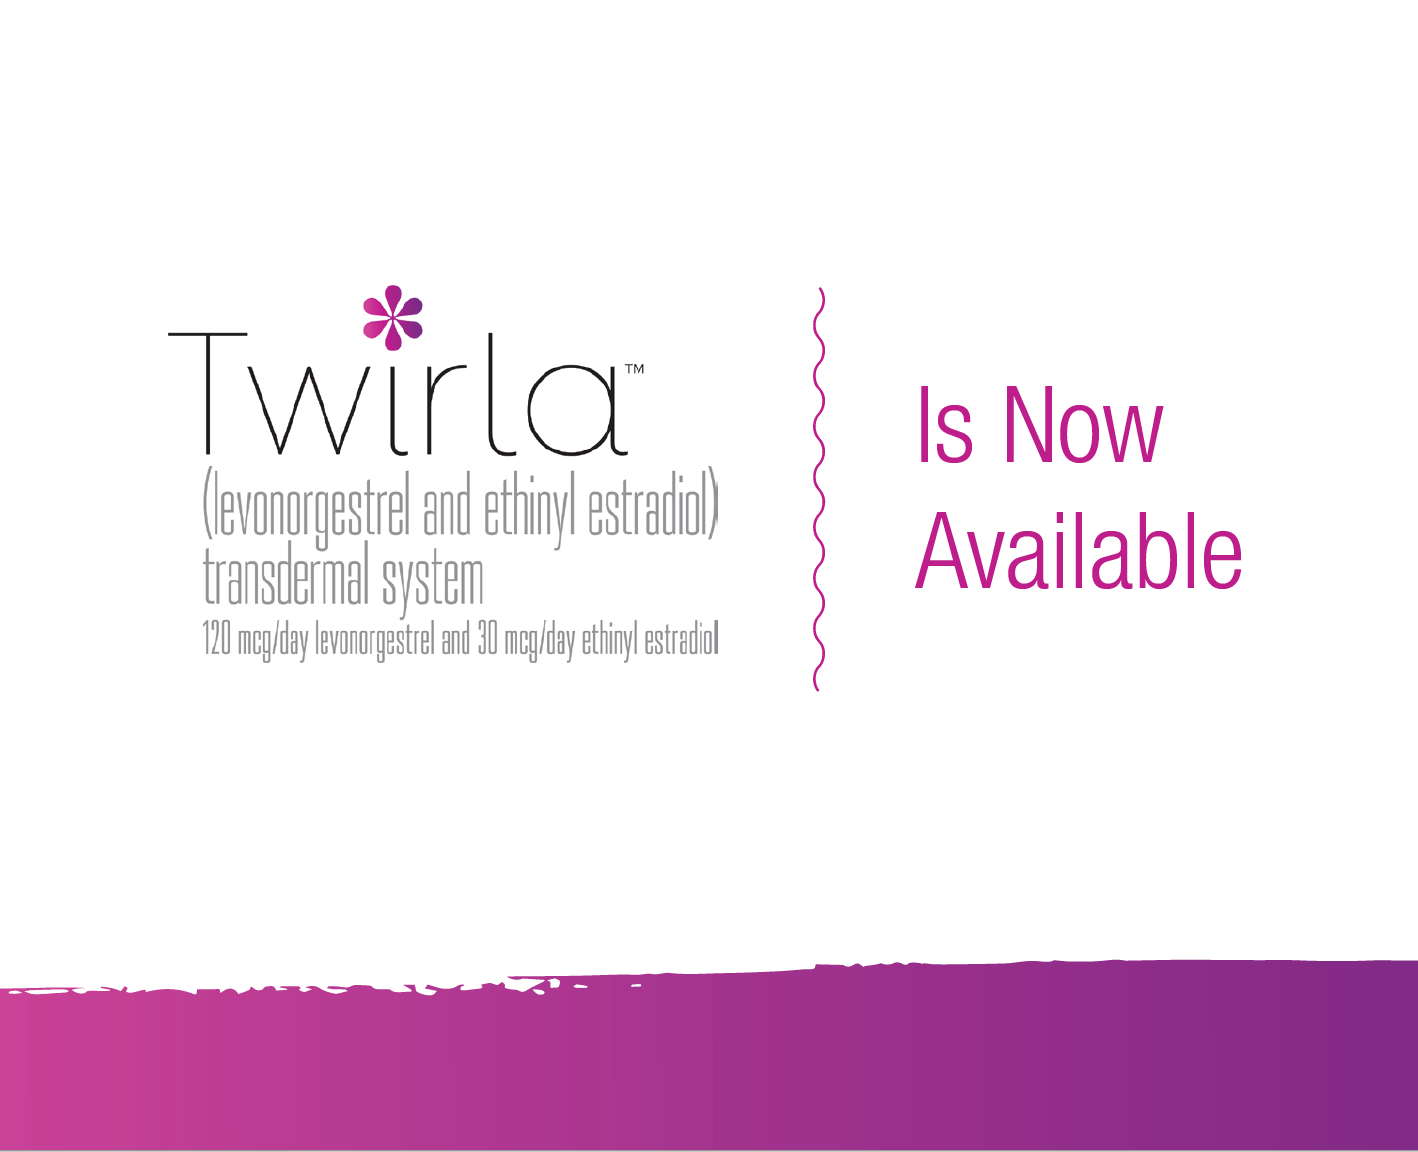 Agile Therapeutics announces nationwide launch of Twirla transdermal system, a new contraceptive patch